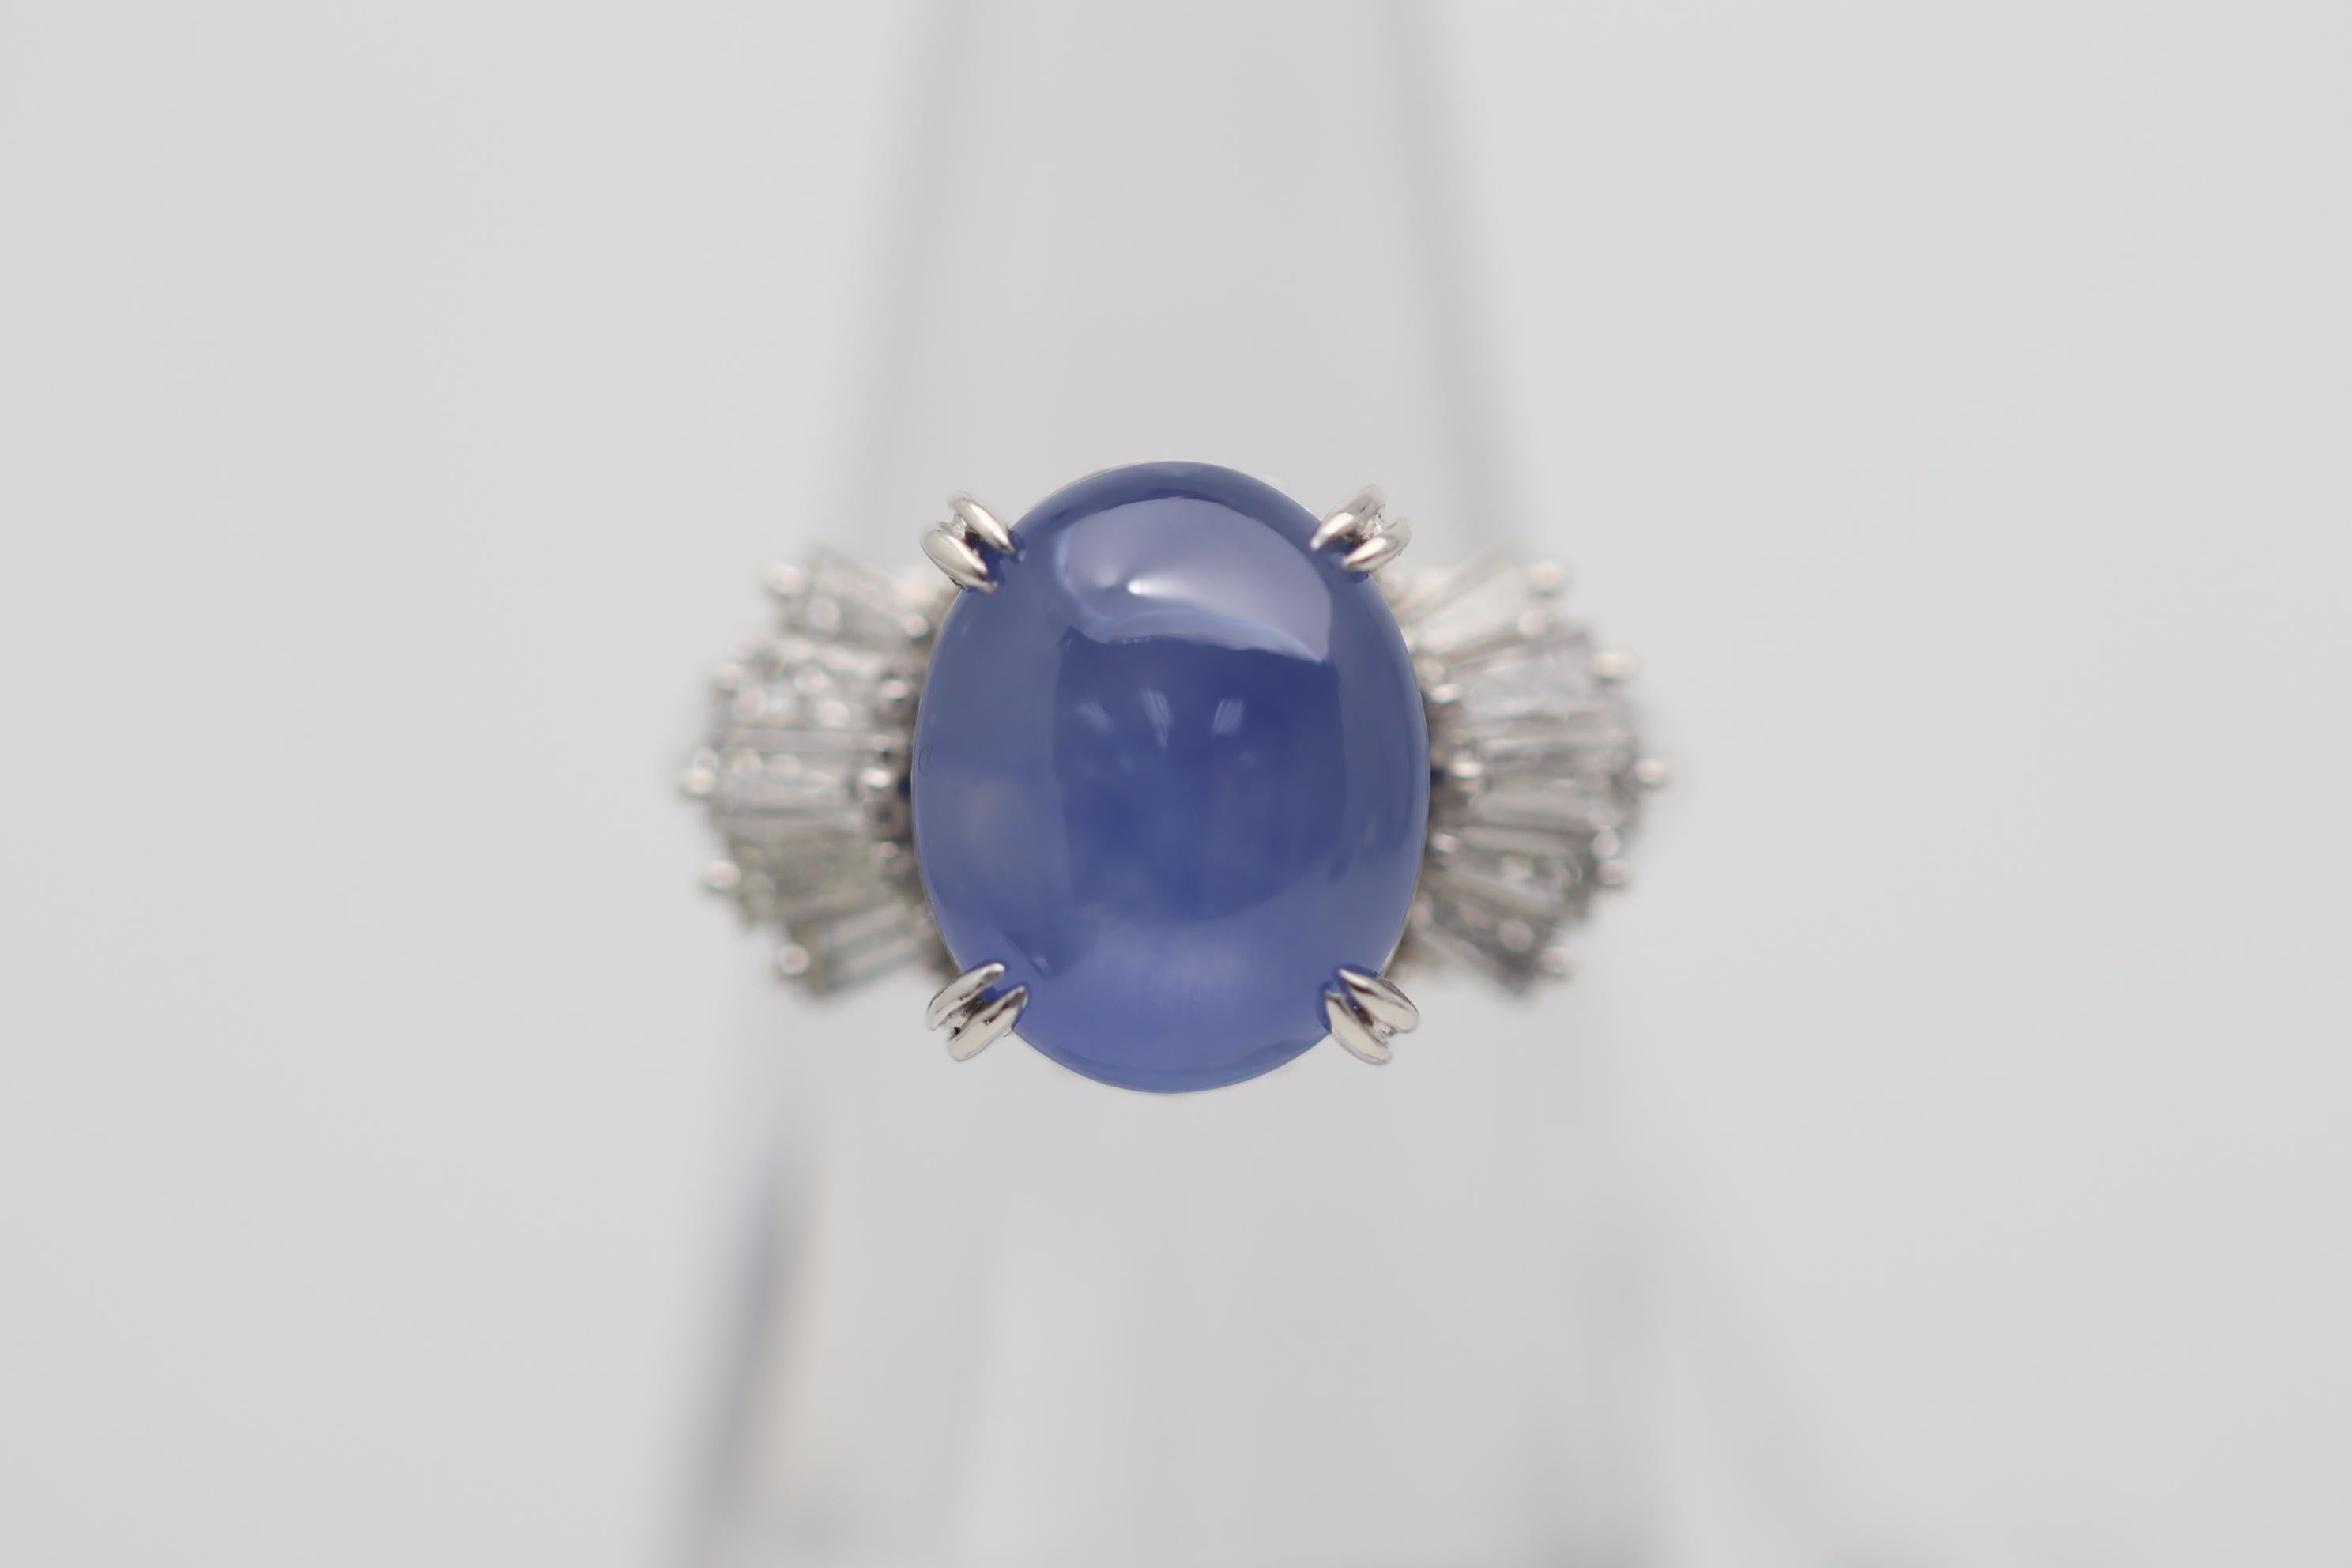 A superb star sapphire with a rich blue color takes center stage. It weighs an impressive 12.68 carats, has an ideal pure bright blue color, along with a very strong and defined 6-rayed star. It is complemented by 0.75 carats of baguette-cut